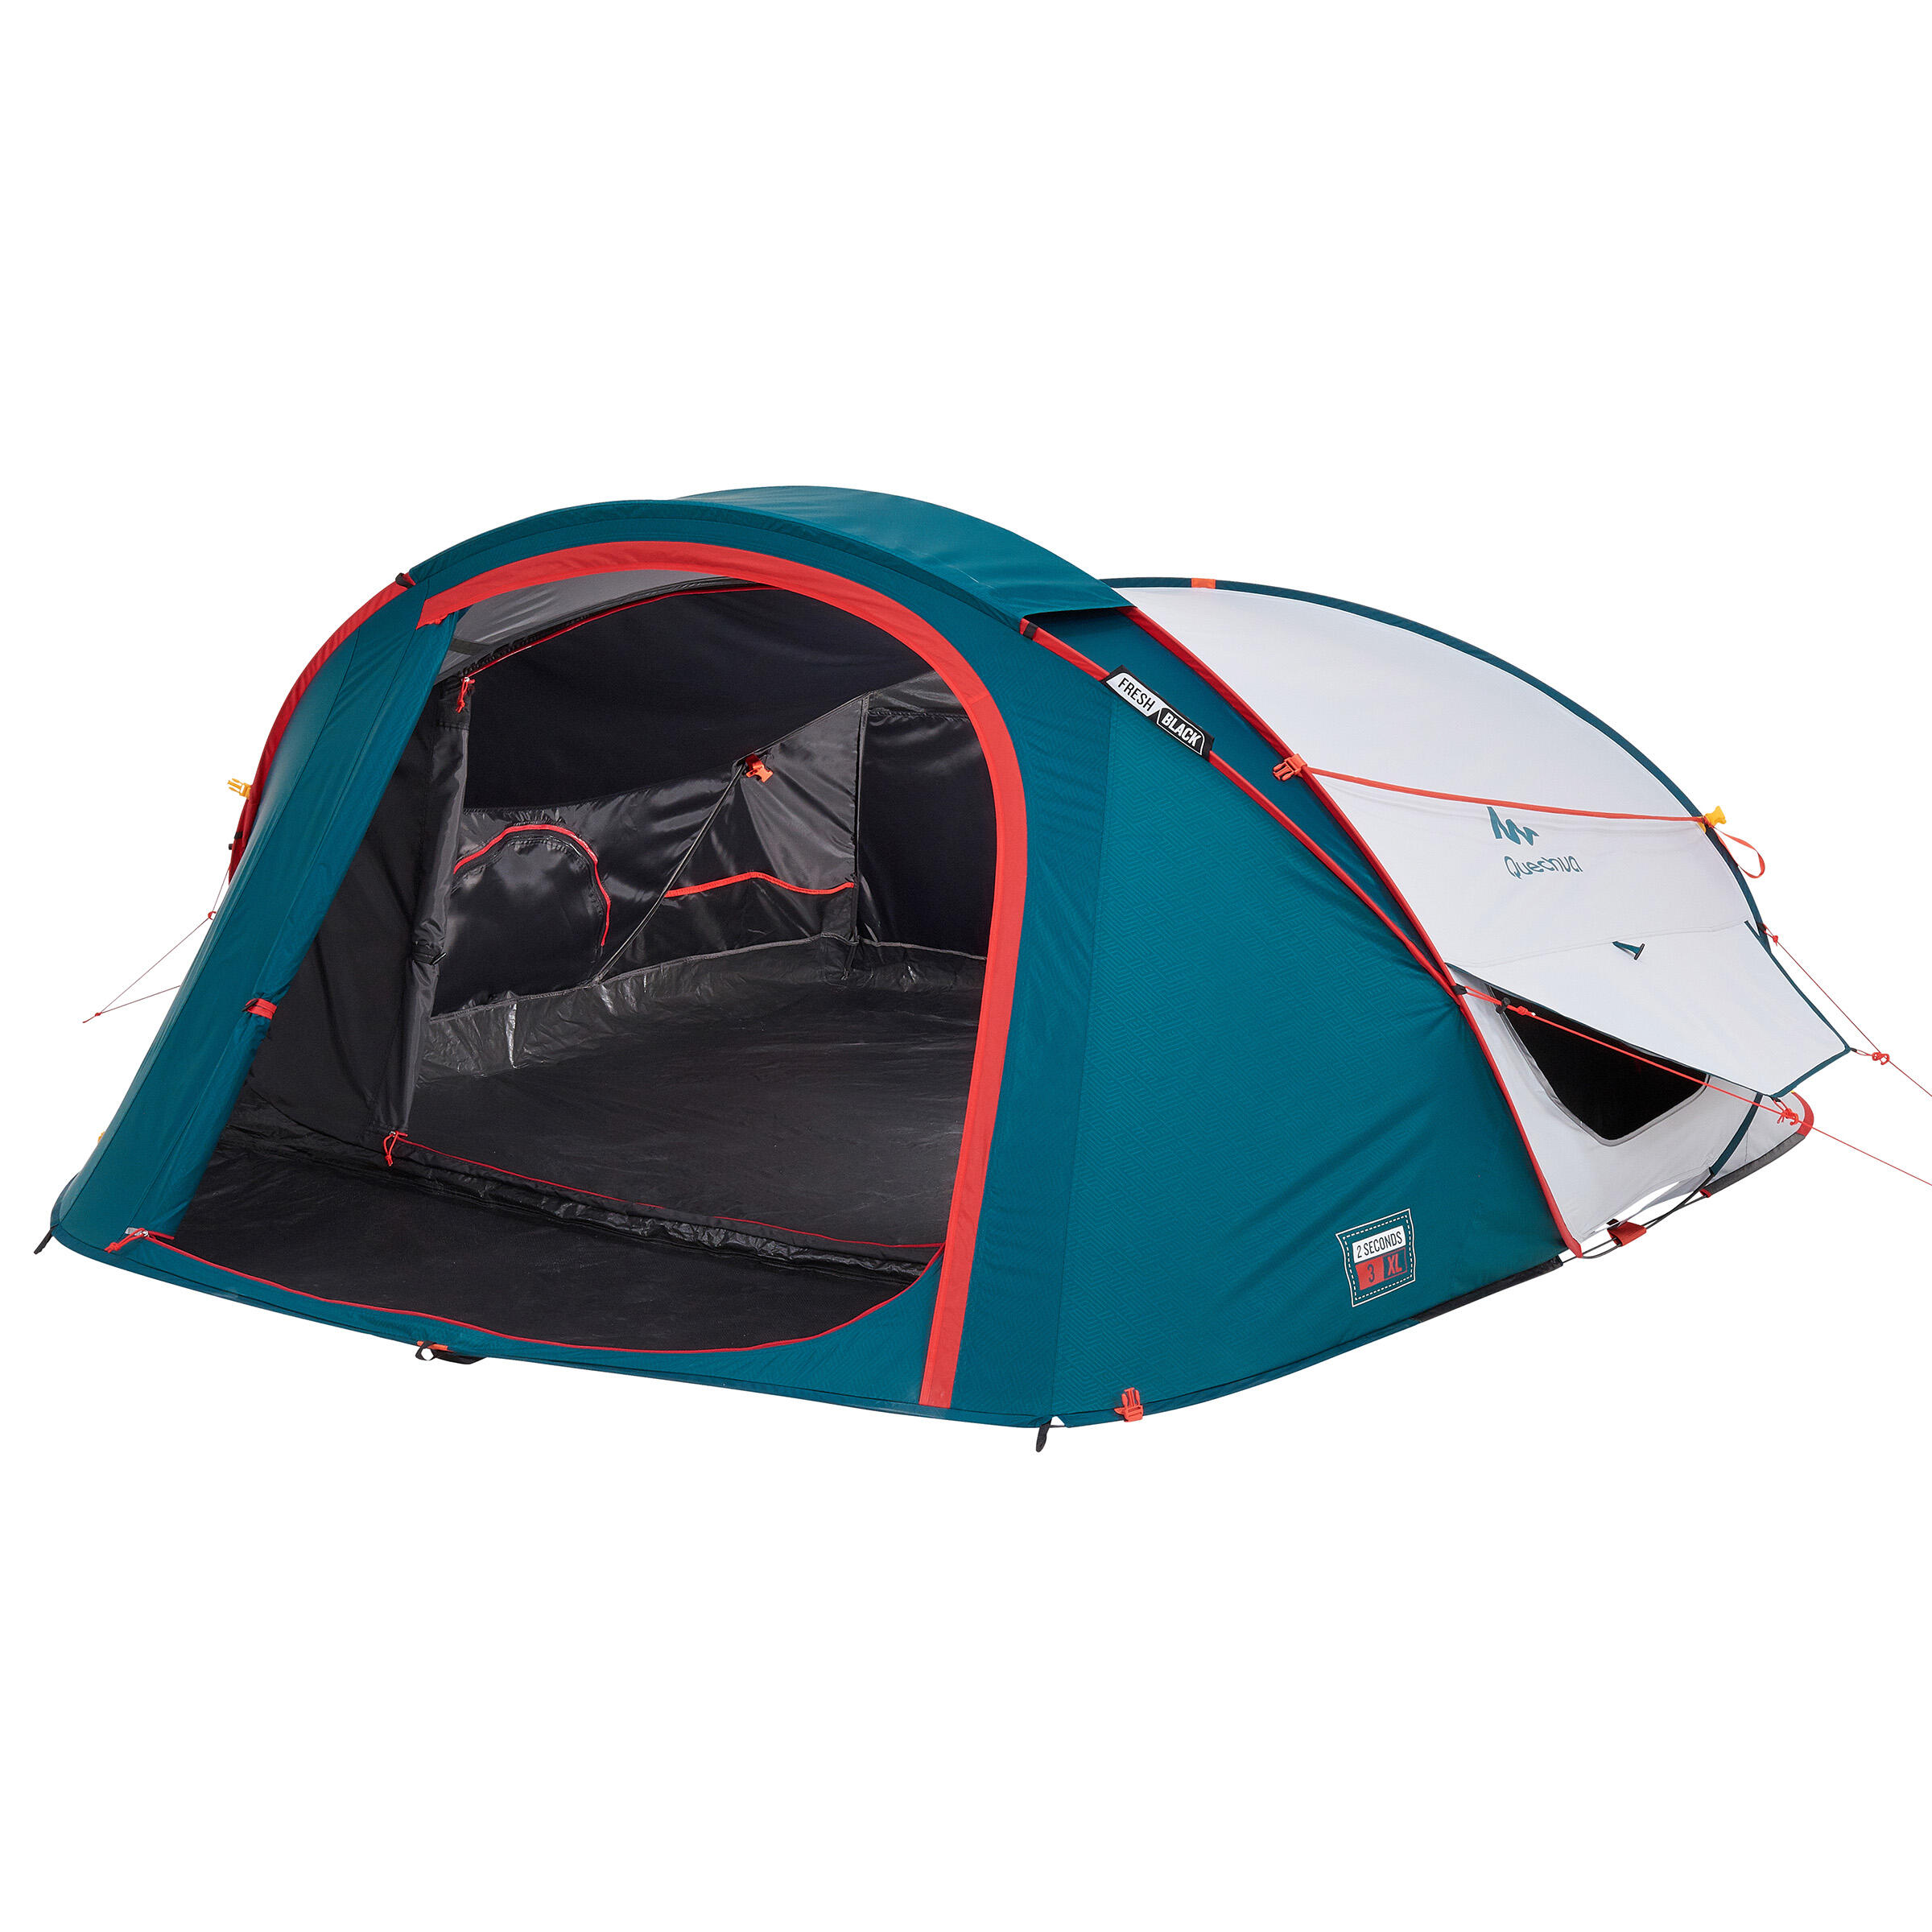 CAMPING TENT - 2 SECONDS - FRESH 